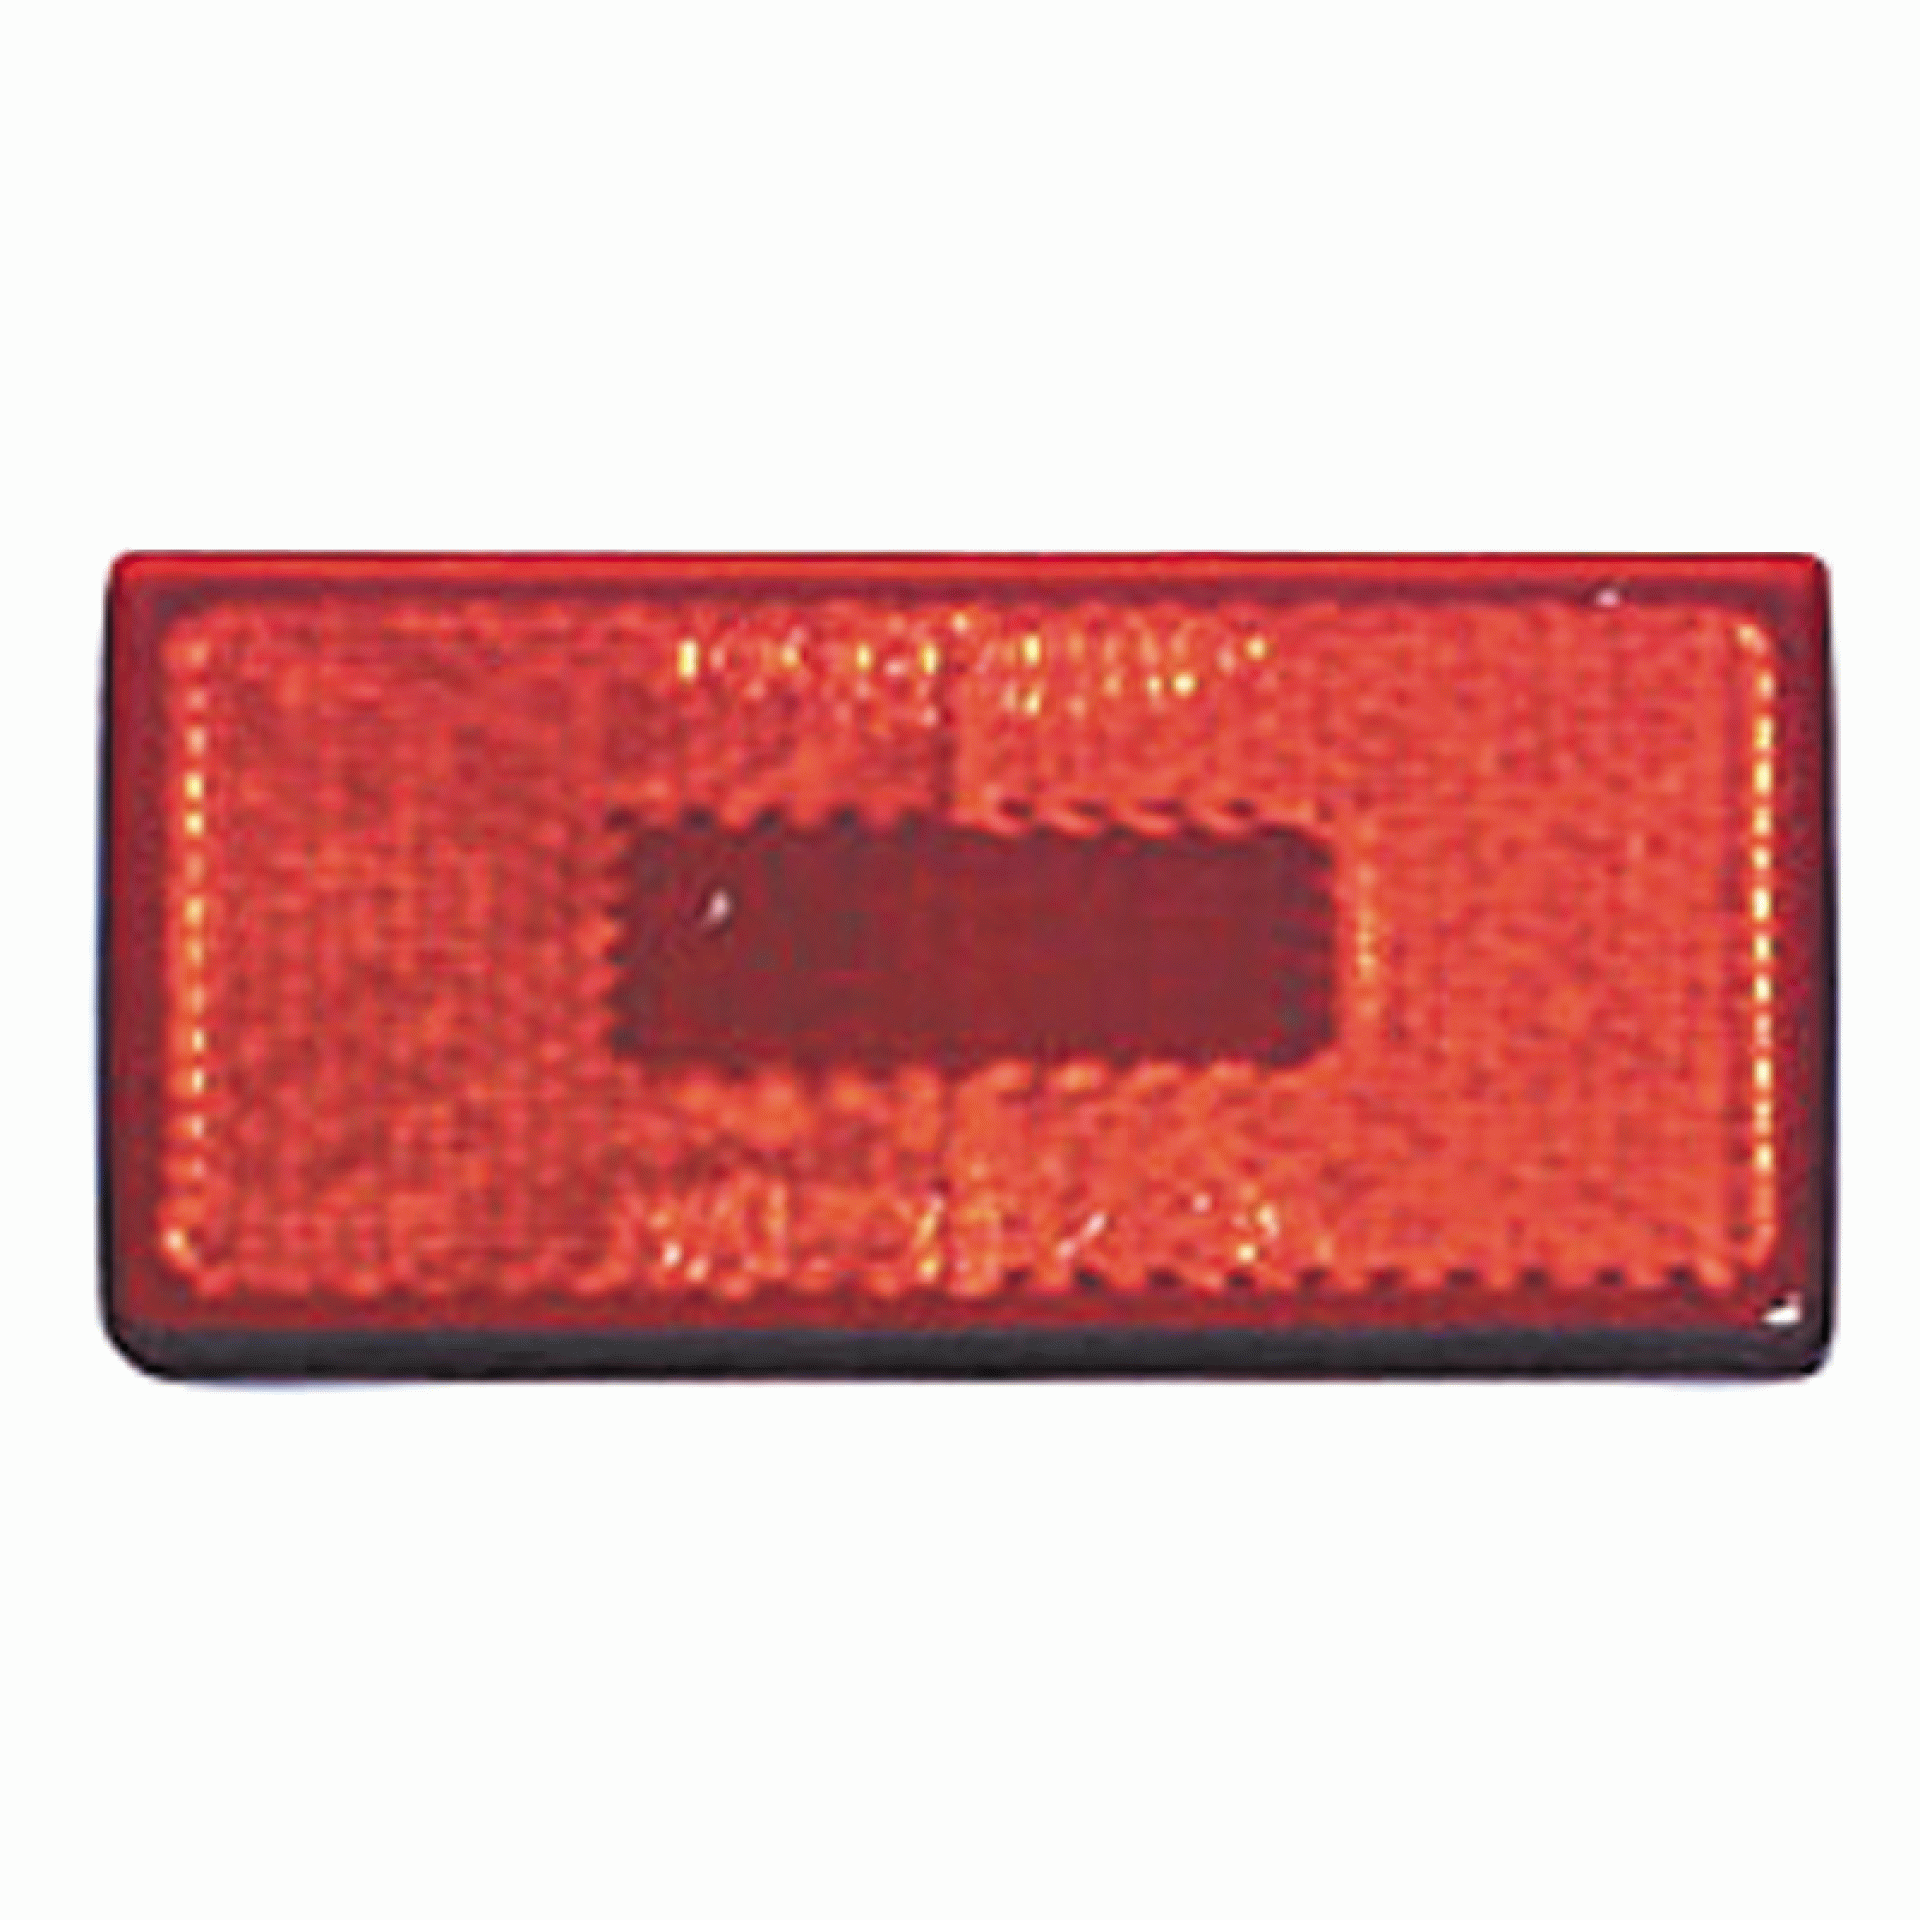 FASTENERS UNLIMITED | CMD-003-56 | CLEARANCE LIGHT - RED